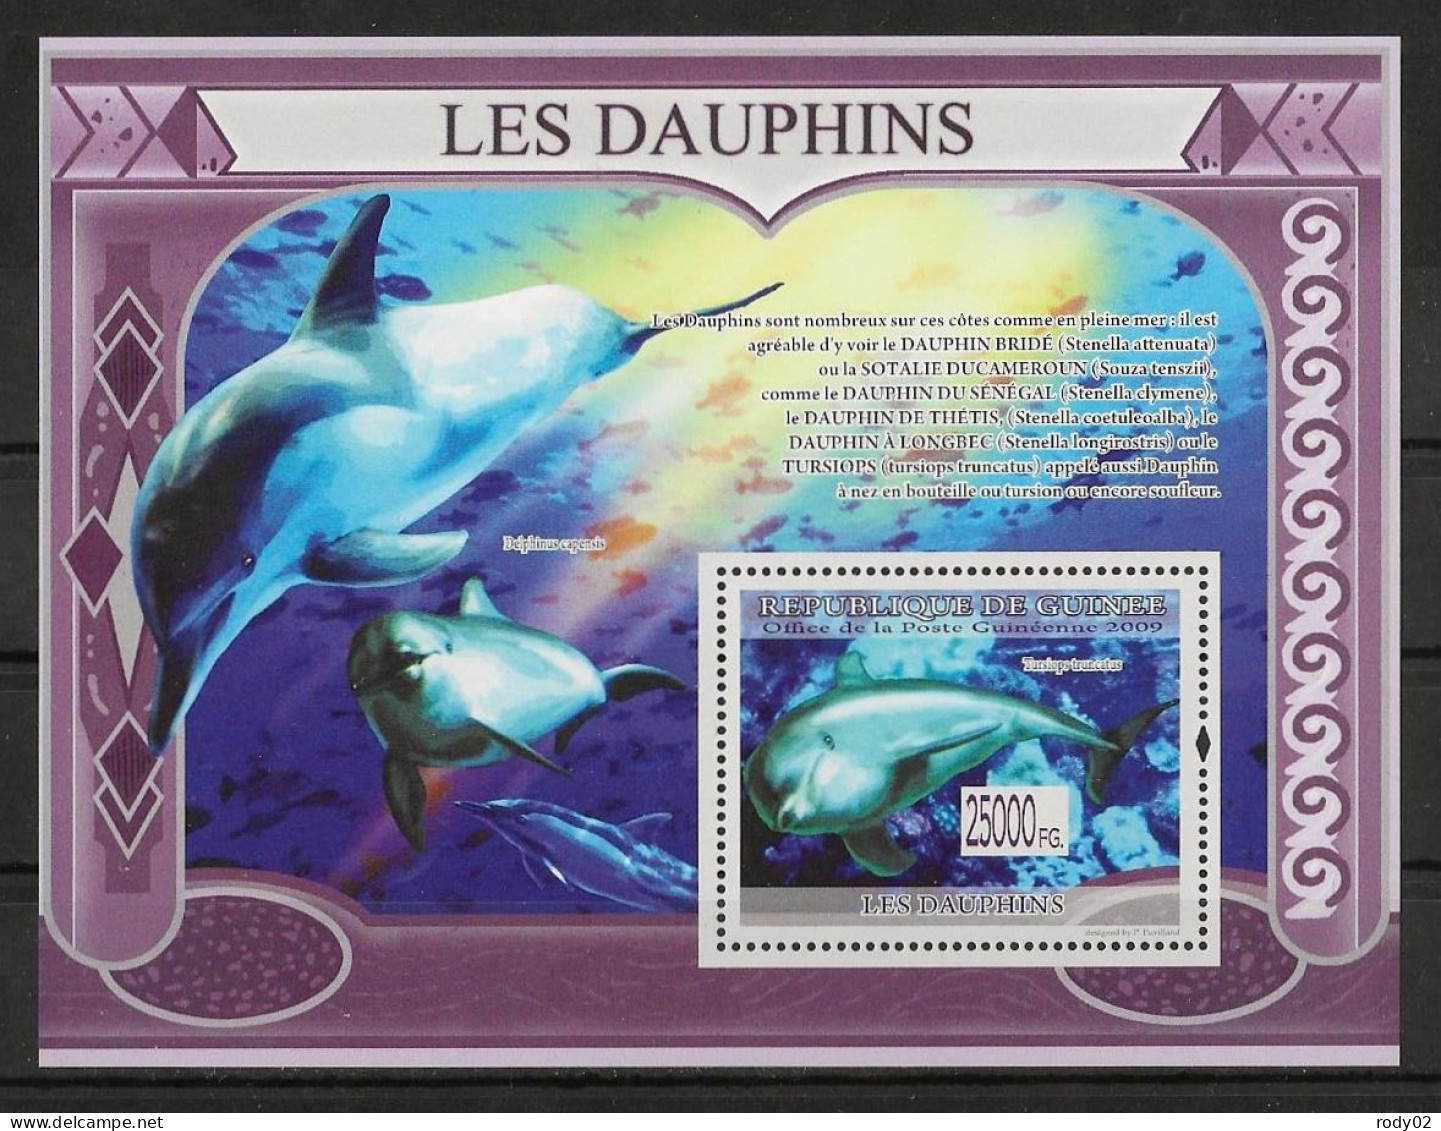 GUINEE - DAUPHINS - N° 4008 A 4013 ET BF 968 - NEUF** MNH - Delfines